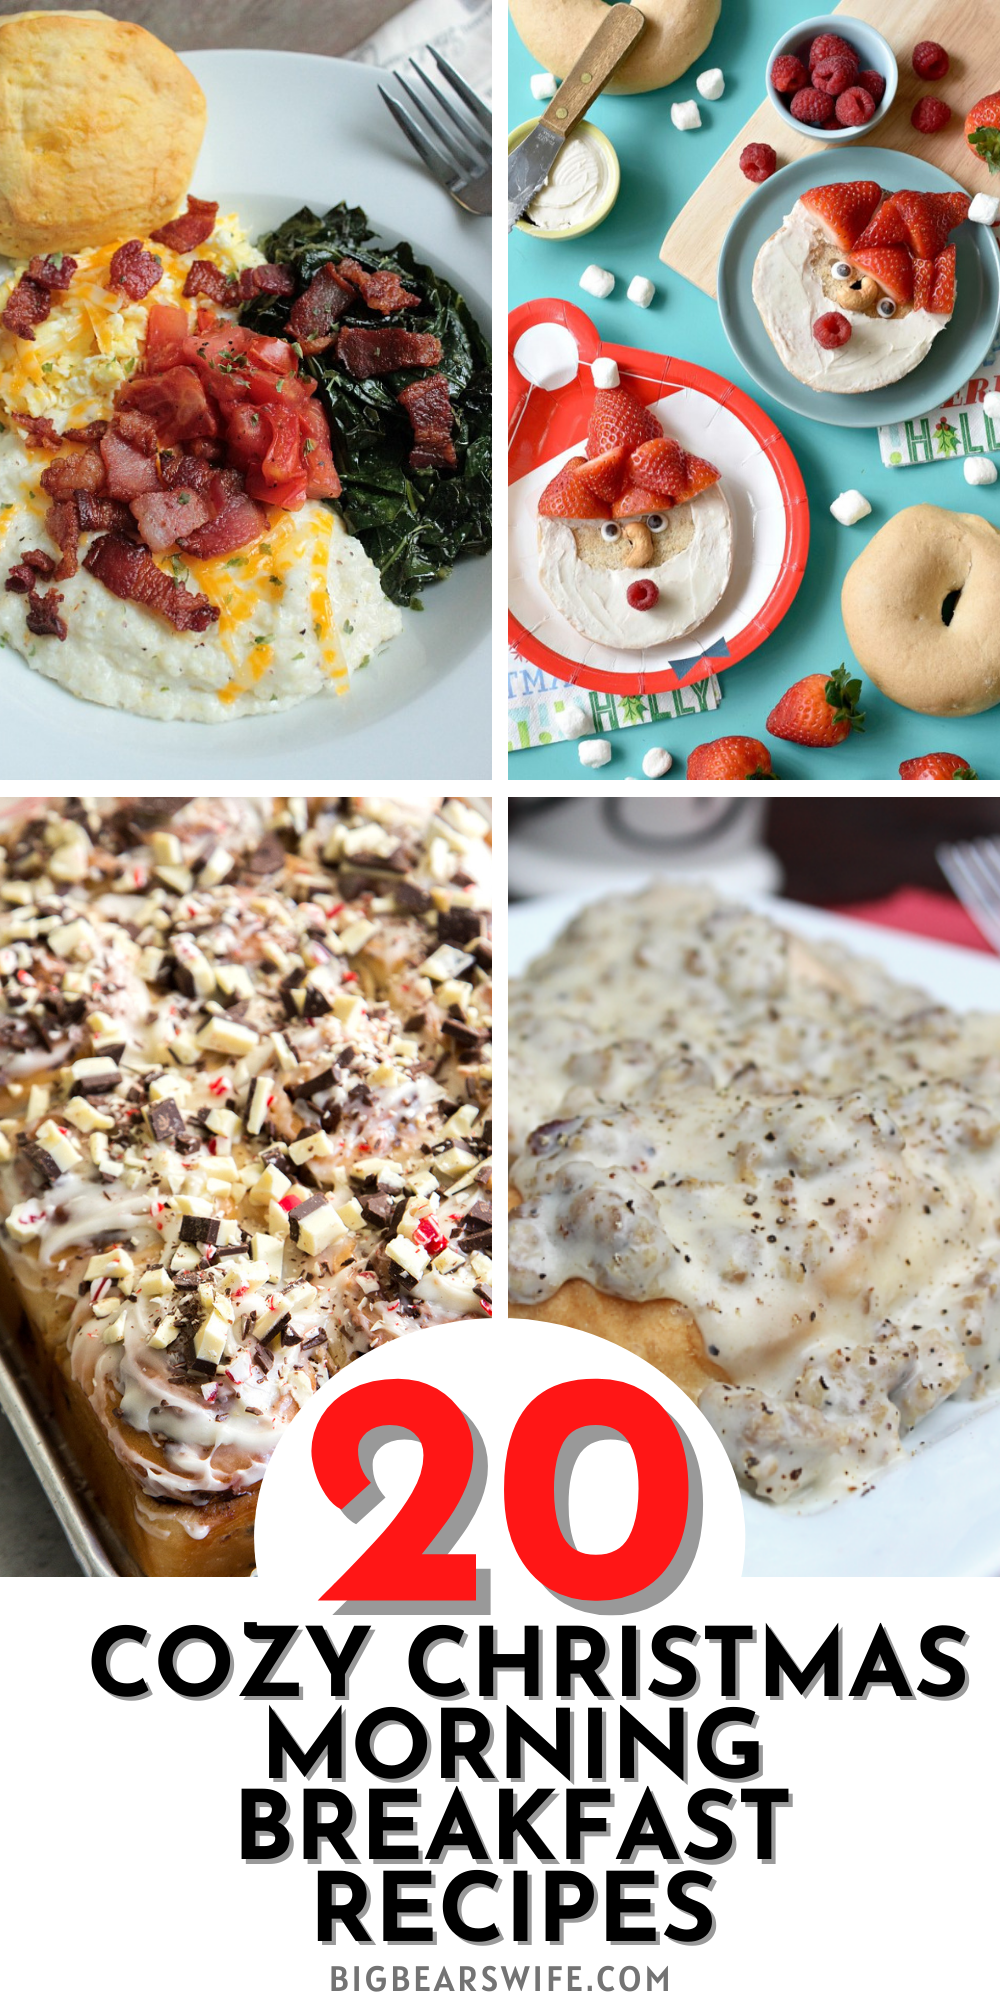 20 Cozy Christmas Morning Breakfast Recipes - We wish you a Merry Christmas, we wish you a Merry Christmas and a tasty morning breakfast! Keep the holiday spirit going on Christmas morning with one of these 20 Cozy Christmas Morning Breakfast Recipes! via @bigbearswife